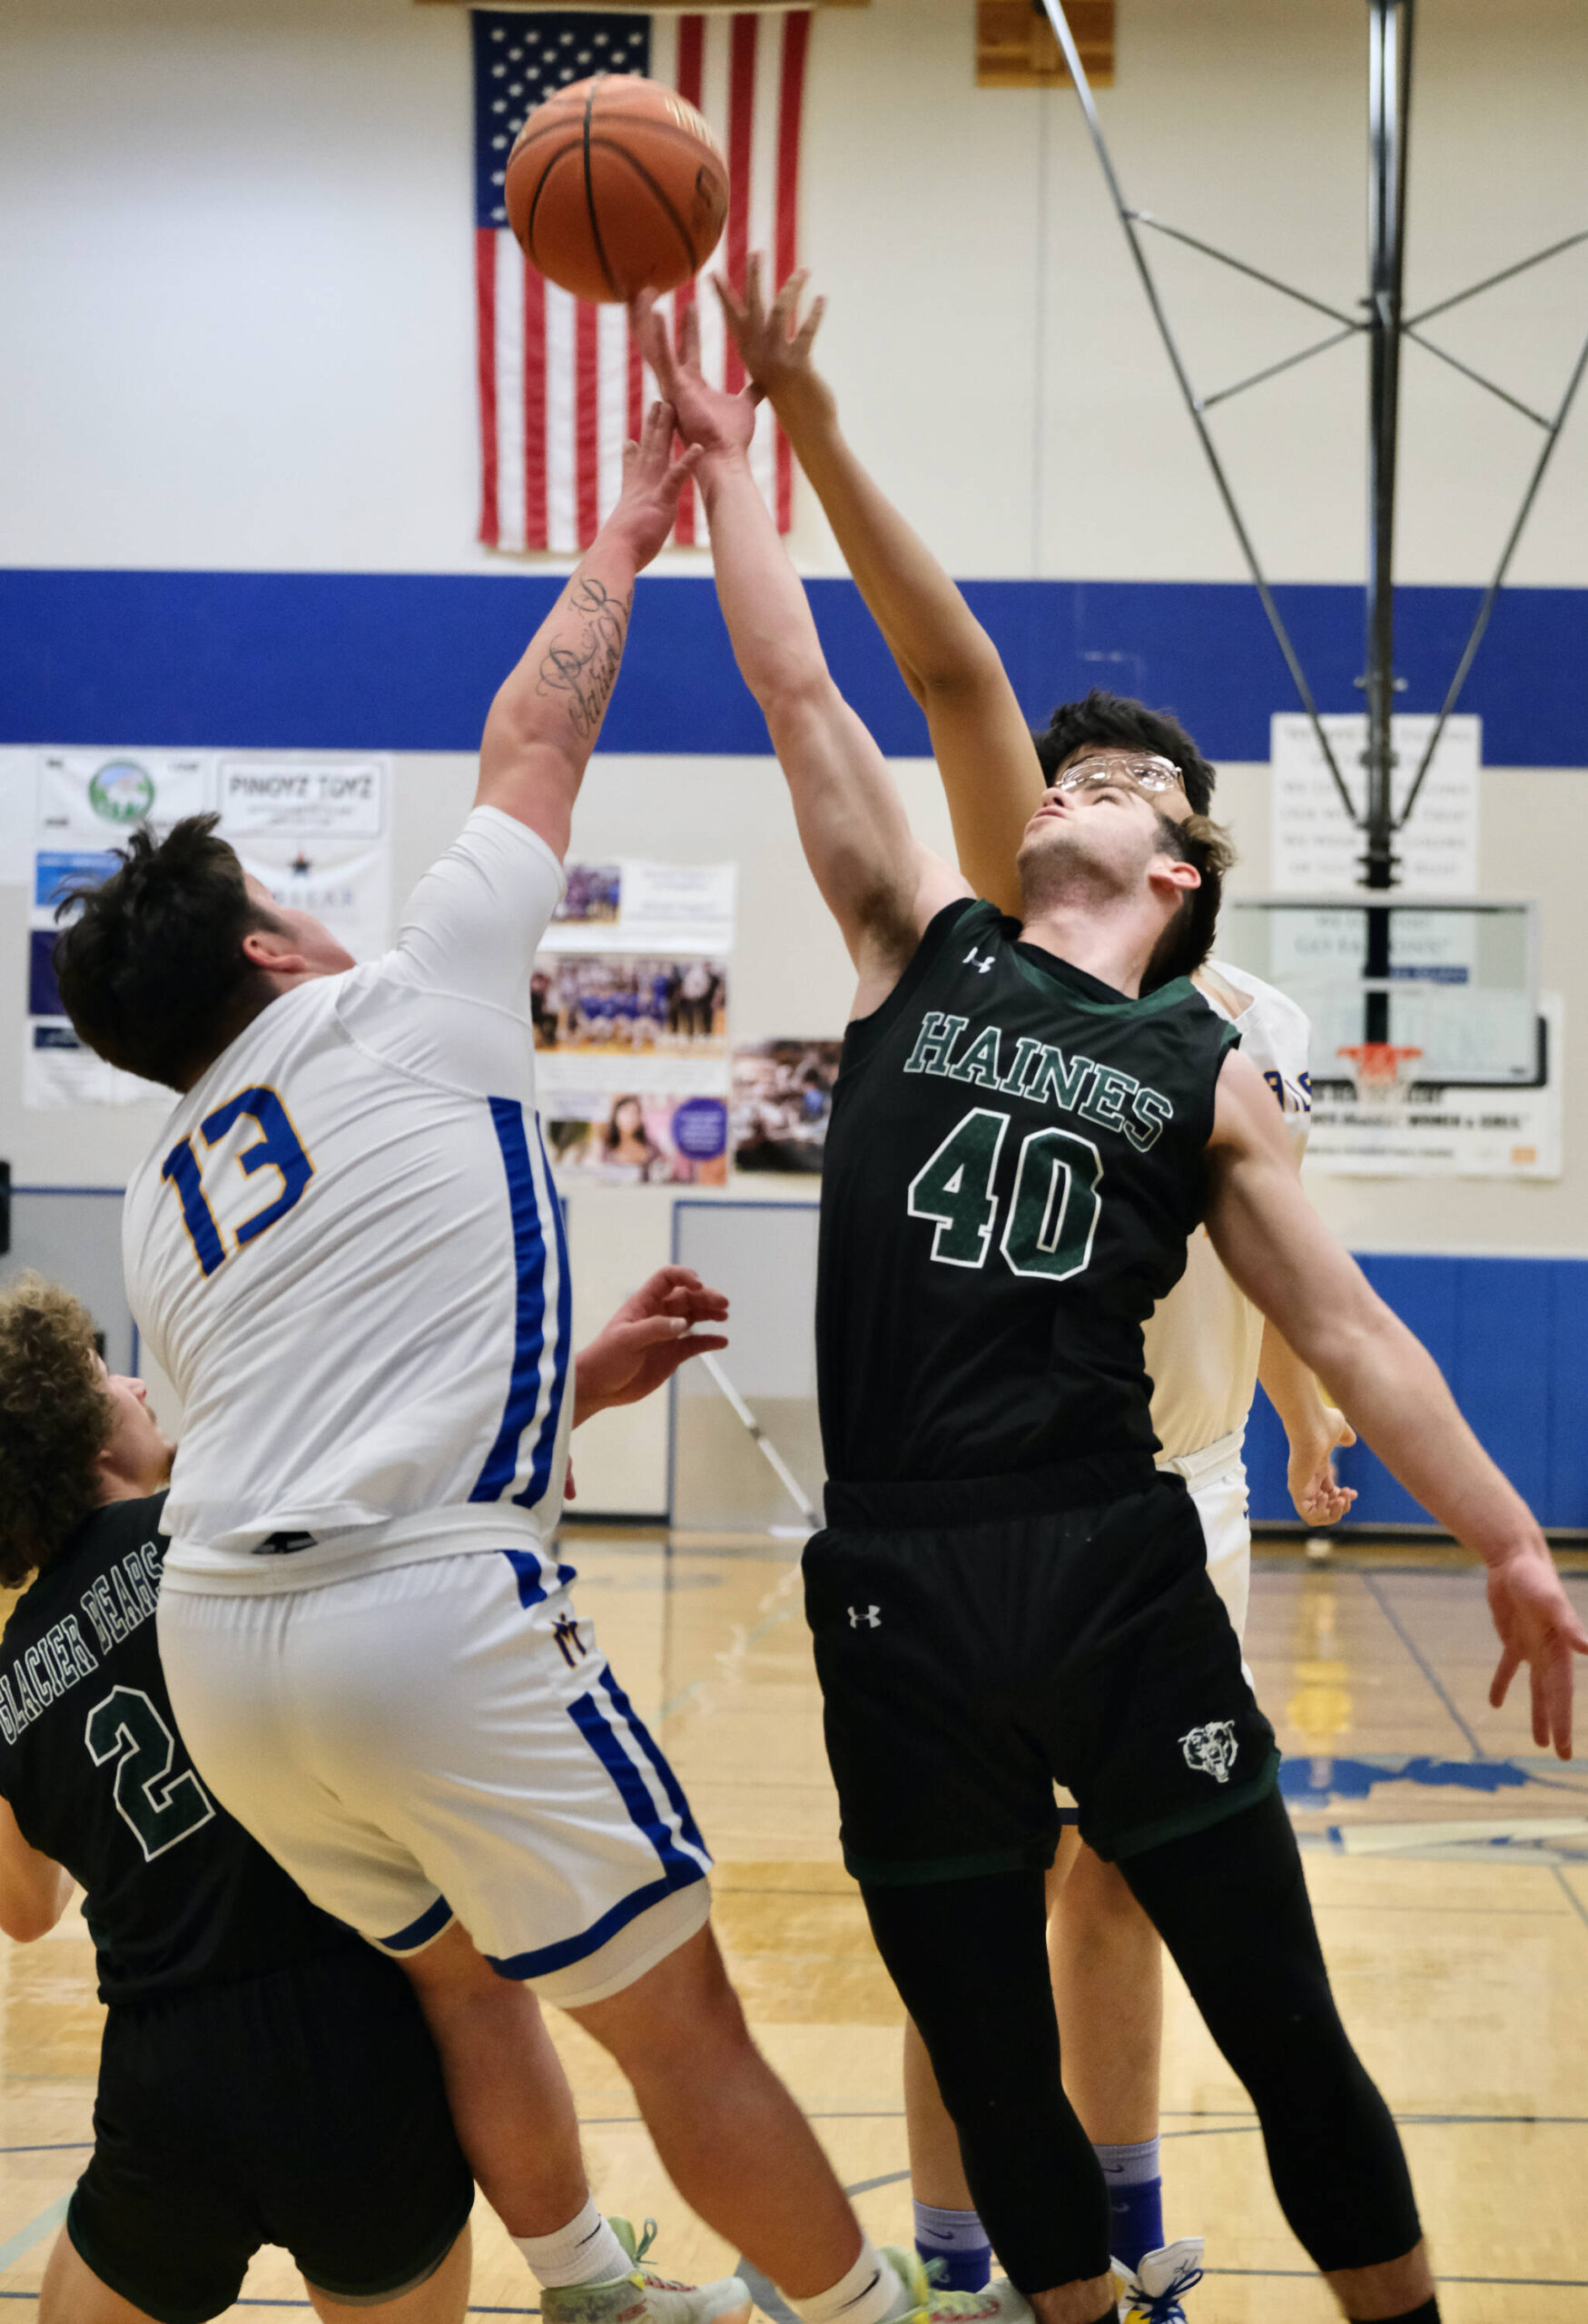 Metlakatla’s Cameron Gaube (13) and Aaron O’Brien battle for a rebound with Haines’ Luke Davis (2) and Eric Brouilette (40) during the Region V tournament on Thursday. (Klas Stolpe / For the Juneau Empire)